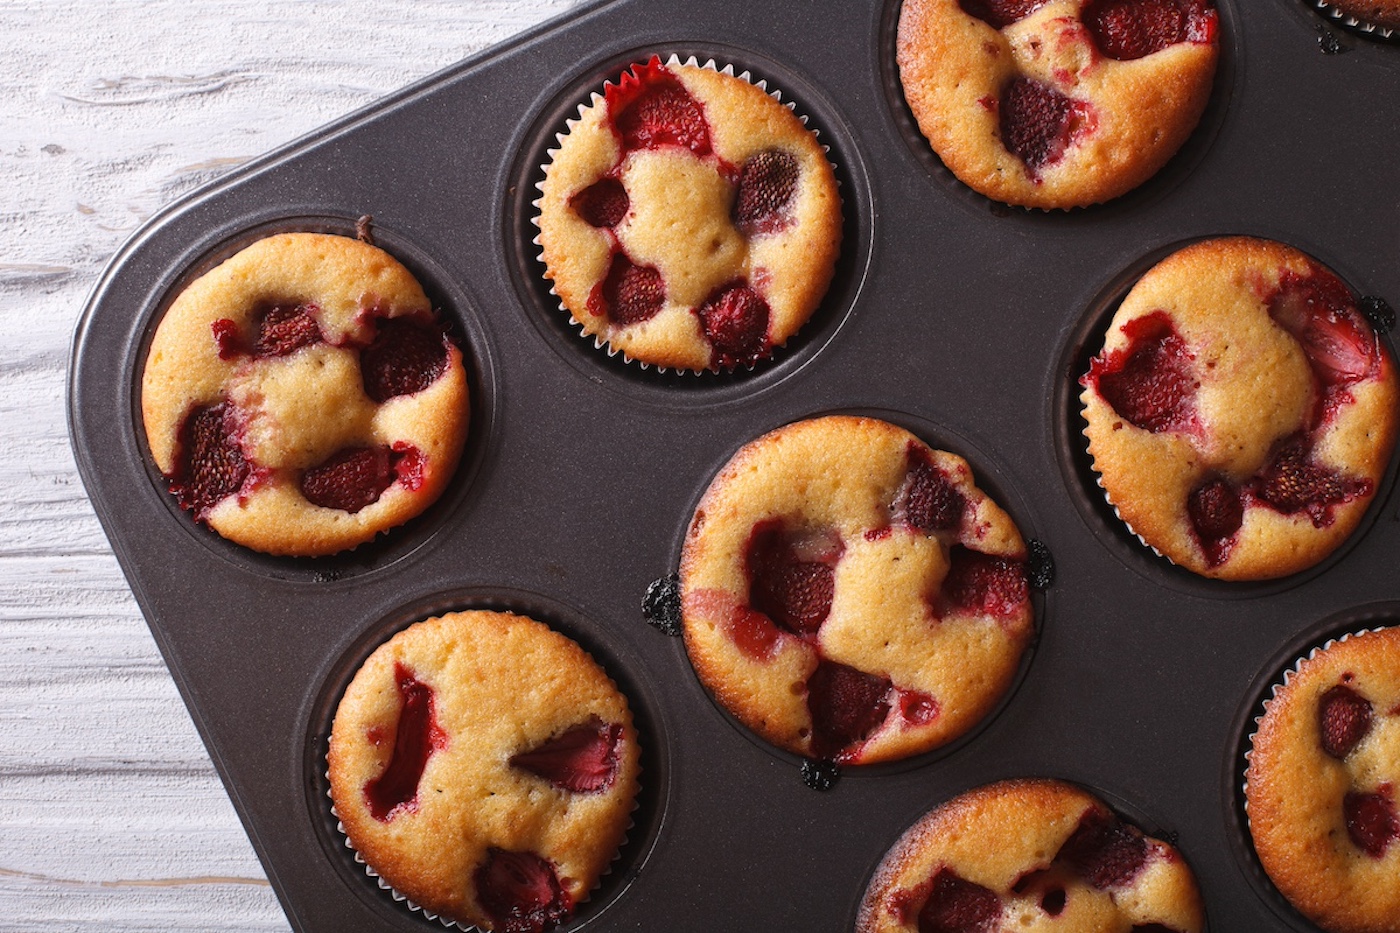 Baked muffins in a muffin tin